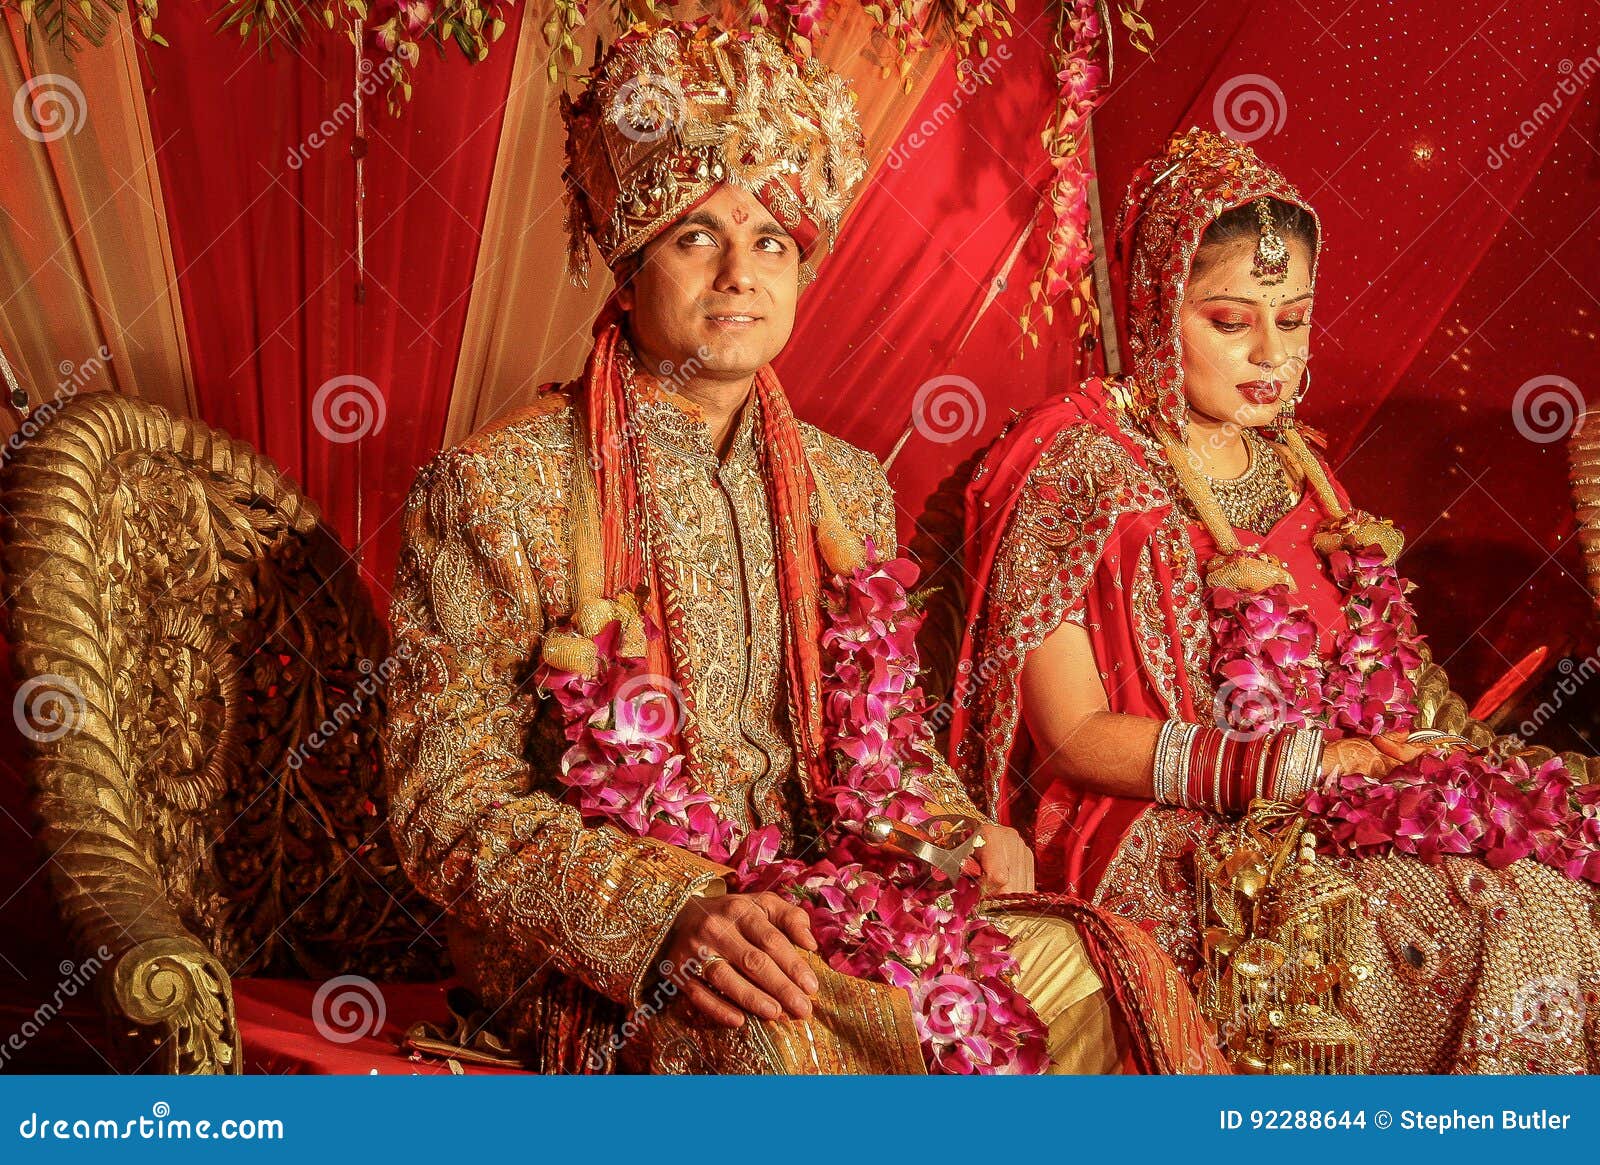 Indian Bride And Groom At Wedding Editorial Stock Image Image Of